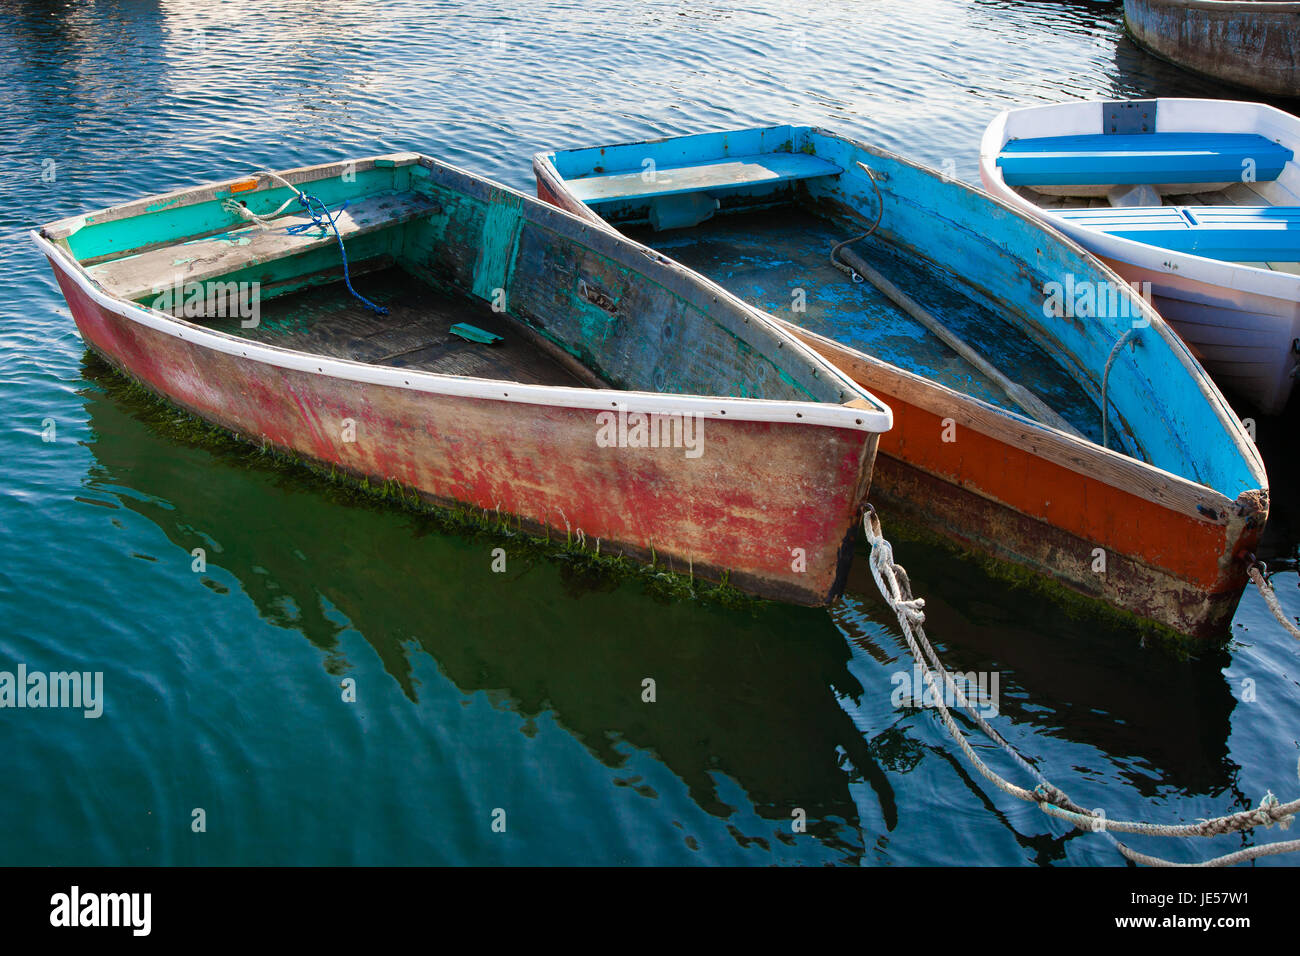 Old wooden row boats with peeling paint Stock Photo